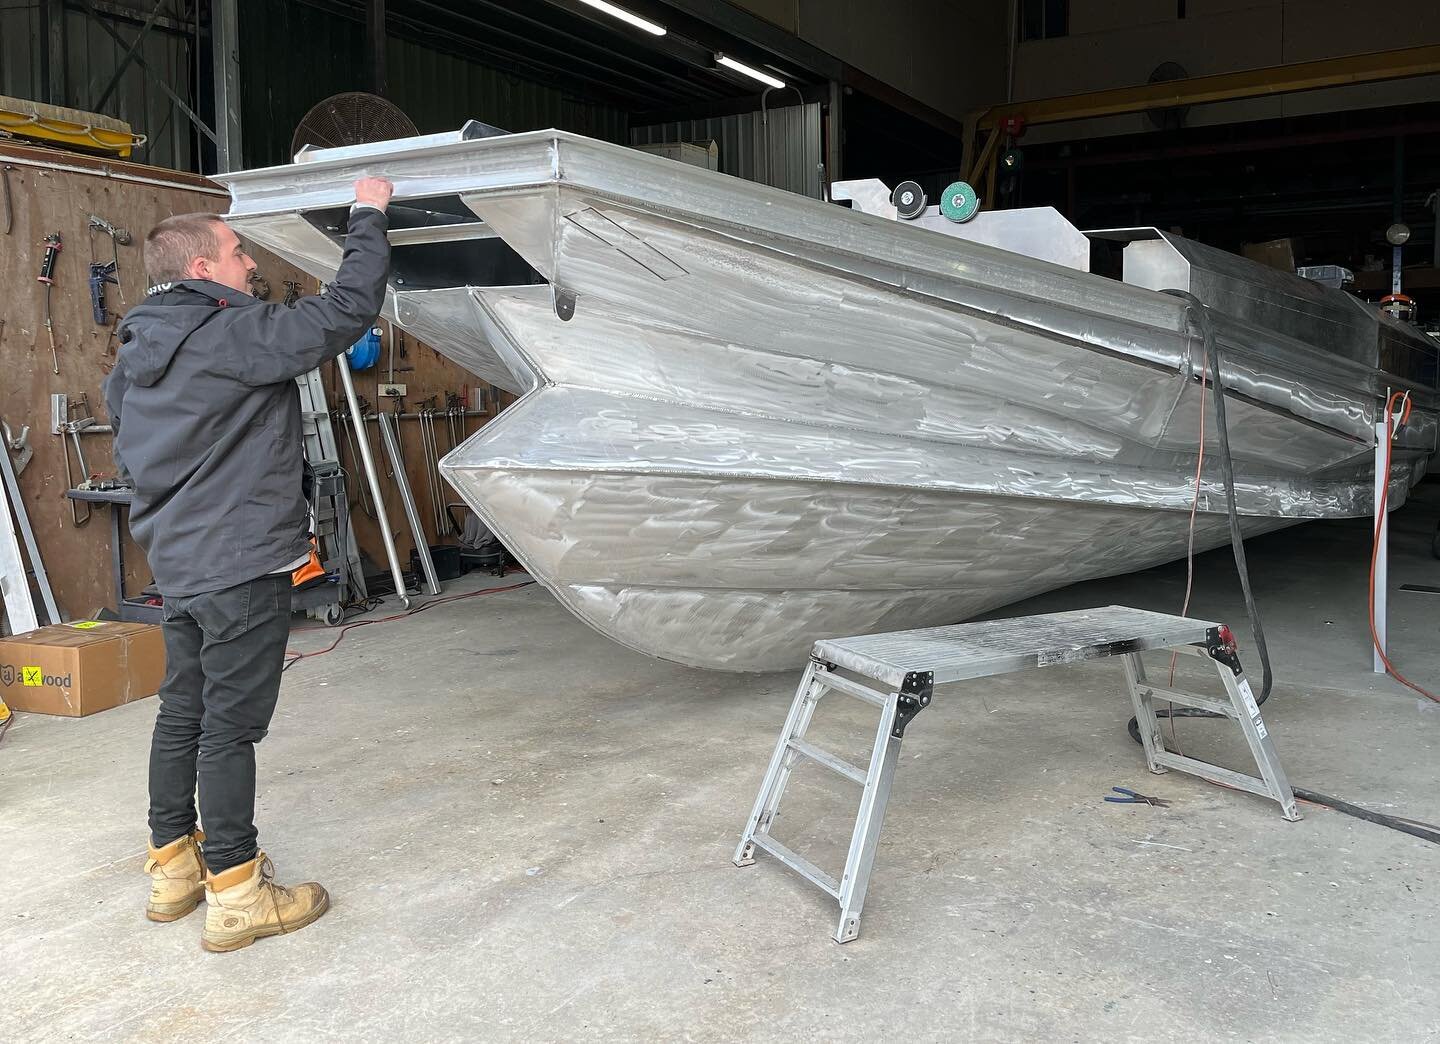 7 years of close collaboration with Alumarine has fostered a deep trust between our companies, allowing CTMD to push the boundaries and innovate. Our latest project, a 12m double stepped, Z-bow monohull, showcases this freedom to explore new concepts